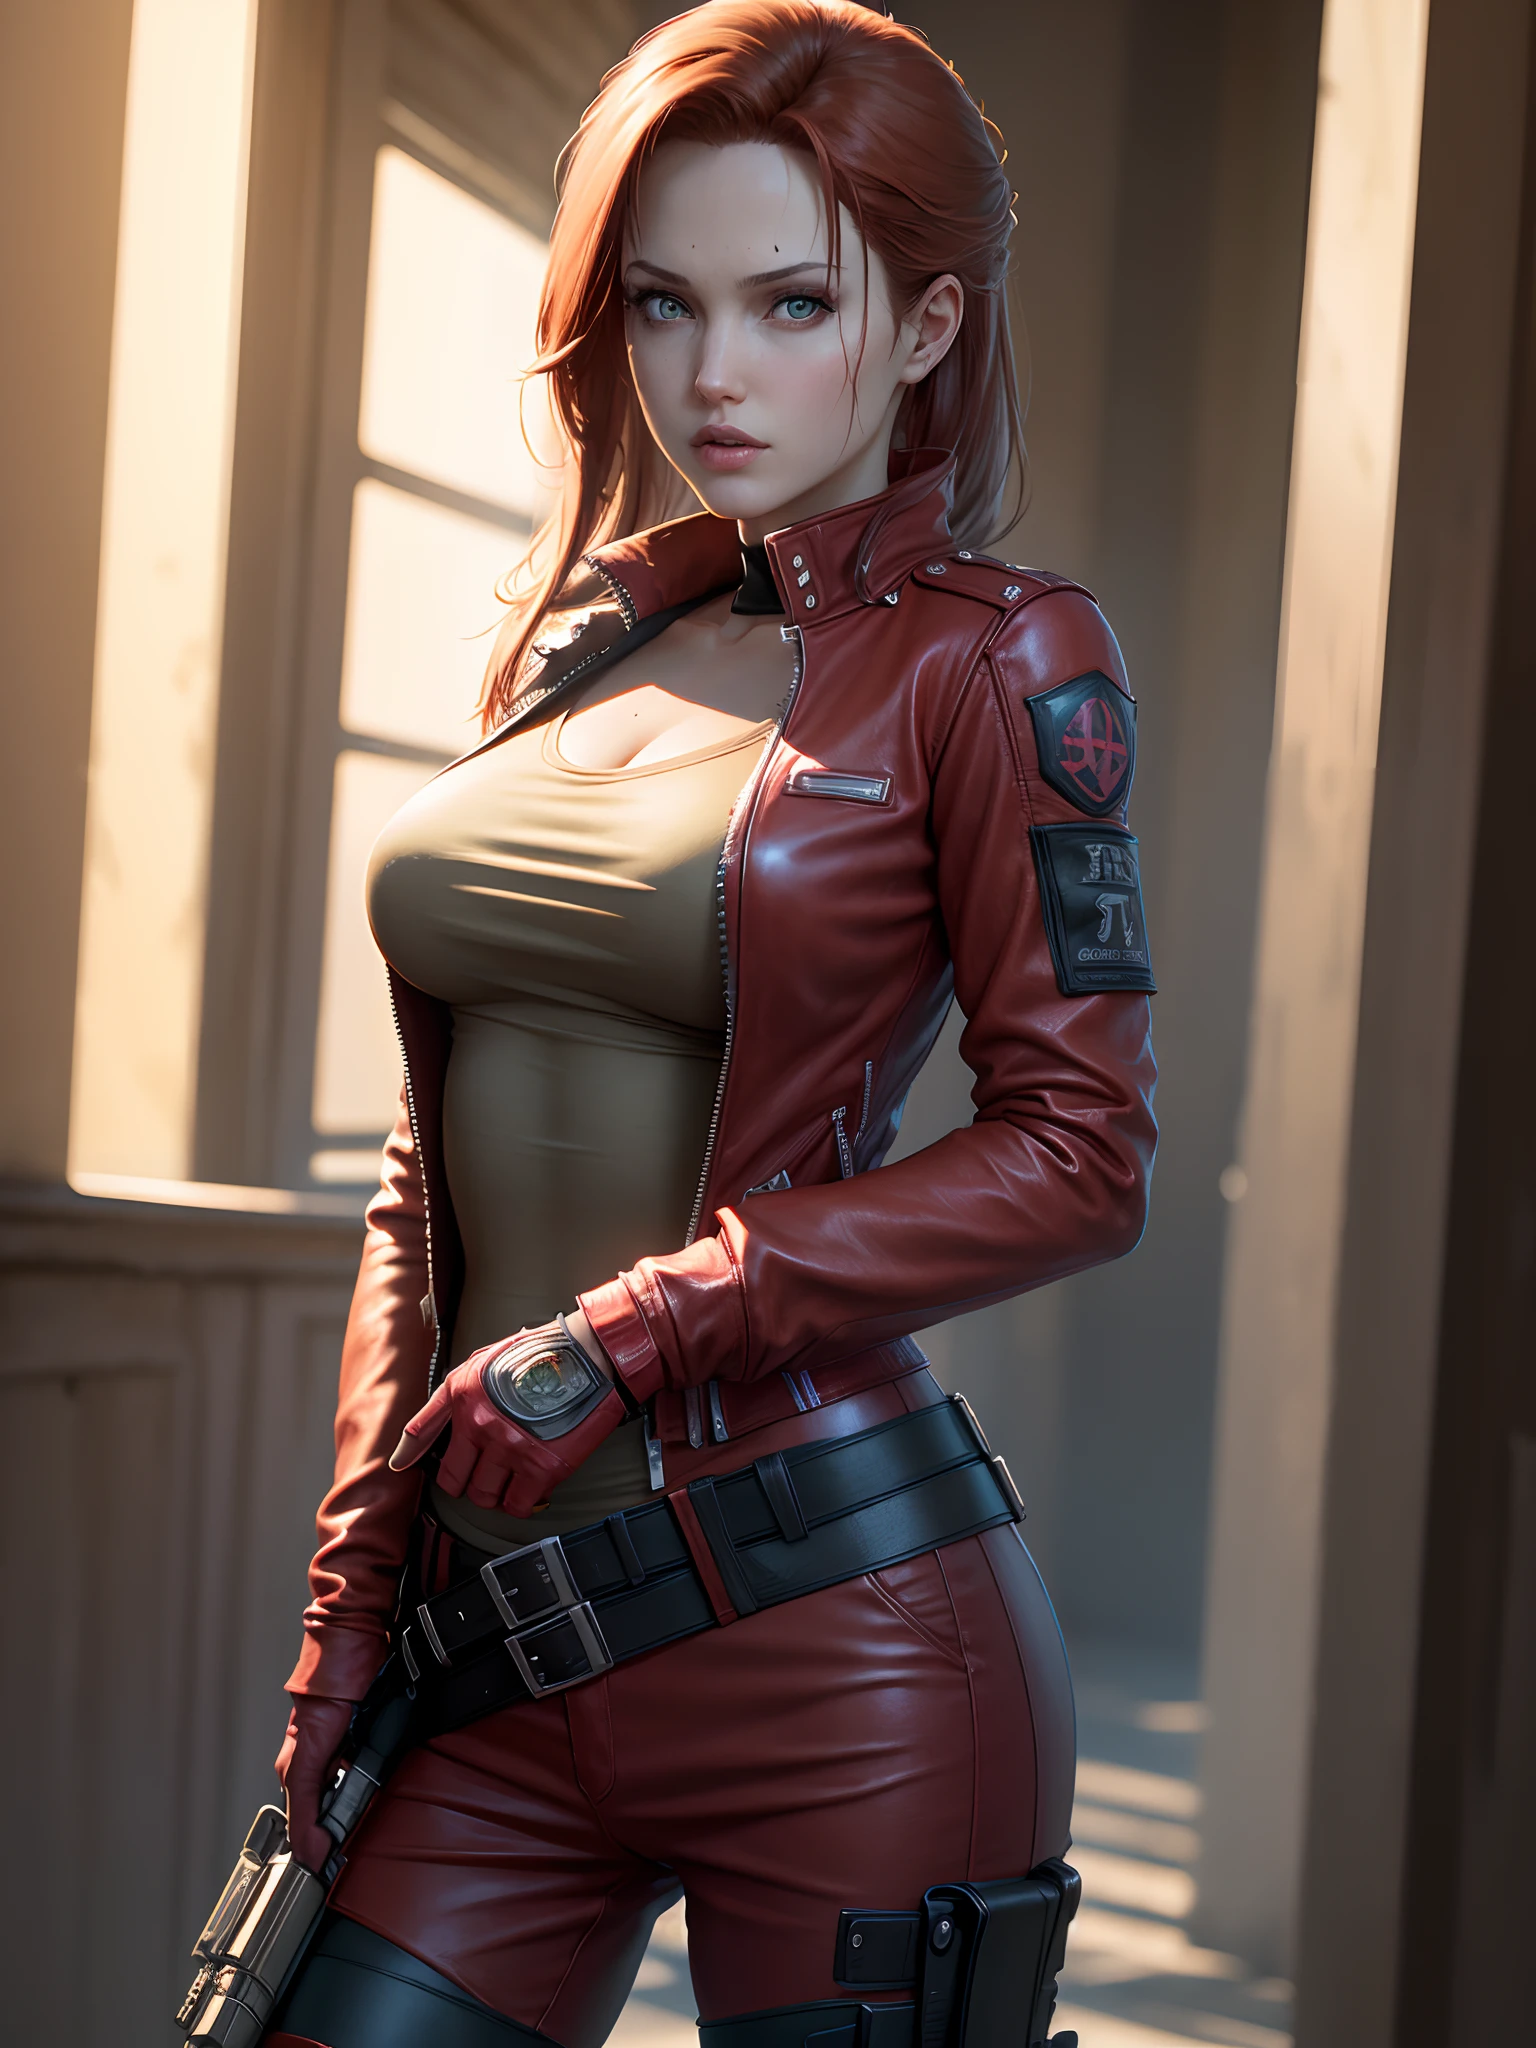 Resident Evil, apocalyptic city, Beautiful Claire Redfield being by a beautiful woman full body pink skin medium red hair, angry clothes red leather jacket, holster holding a gun, realistic detailed face body highly detailed CGI 8K clear image, hologram, (medium breasts: 1.3), (realism:1.5), (Realisitc:1.4), (Absurdity:1.4), 8k, ultra-detailed, beautiful girl detailed, (1:1.4 only), 1 girl, (Viewer facing:1.2), ( bright sunny day:1.5), Intricate body details, (short:1.3), (best quality: 1.0), (Ultra Highres): 1.0), highly detailed face and eyes, (photorealistic: 1.2)